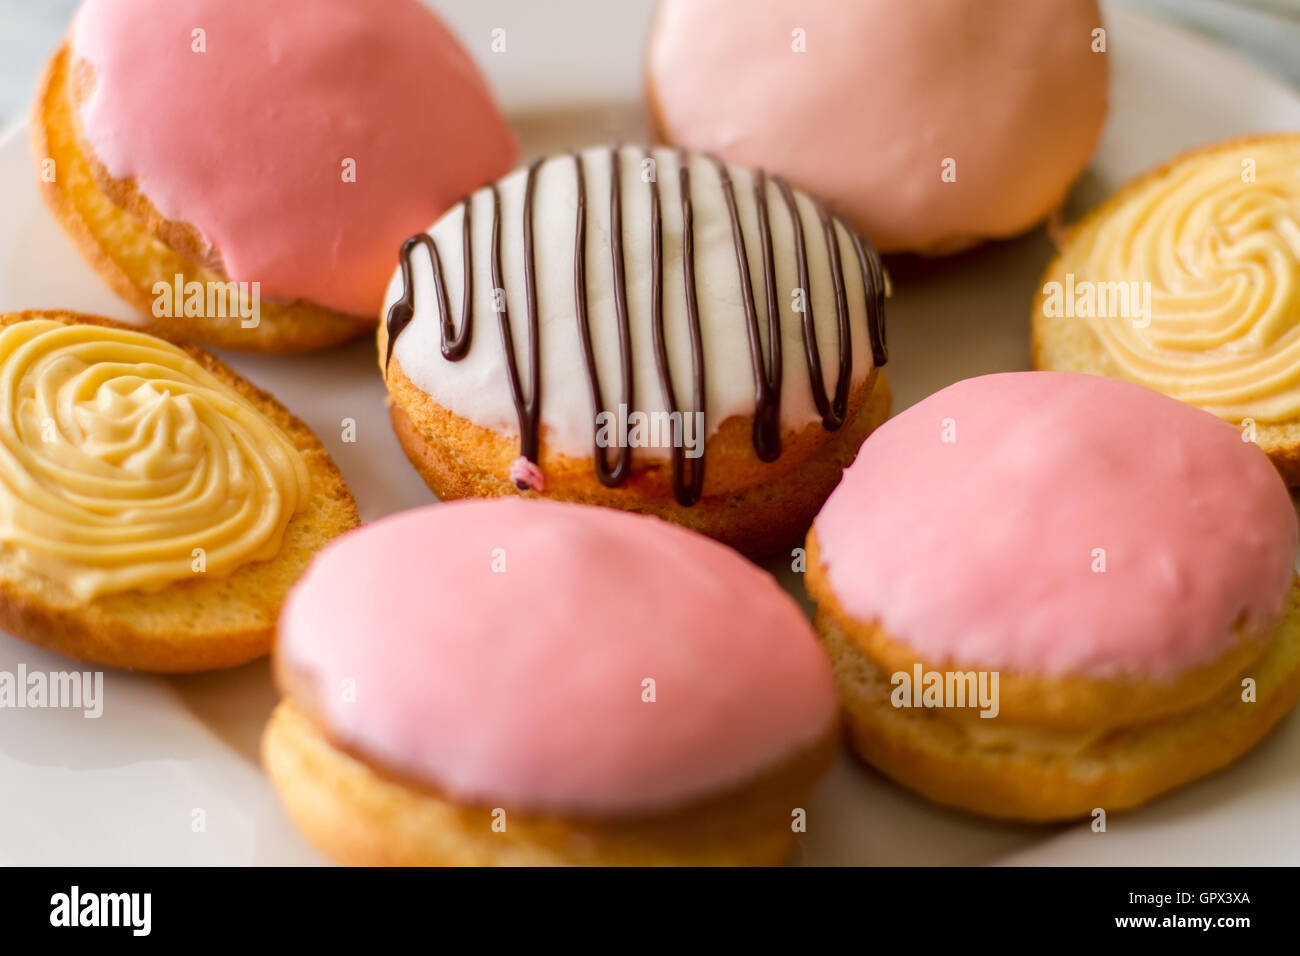 Biscuits with colorful glazing. Stock Photo